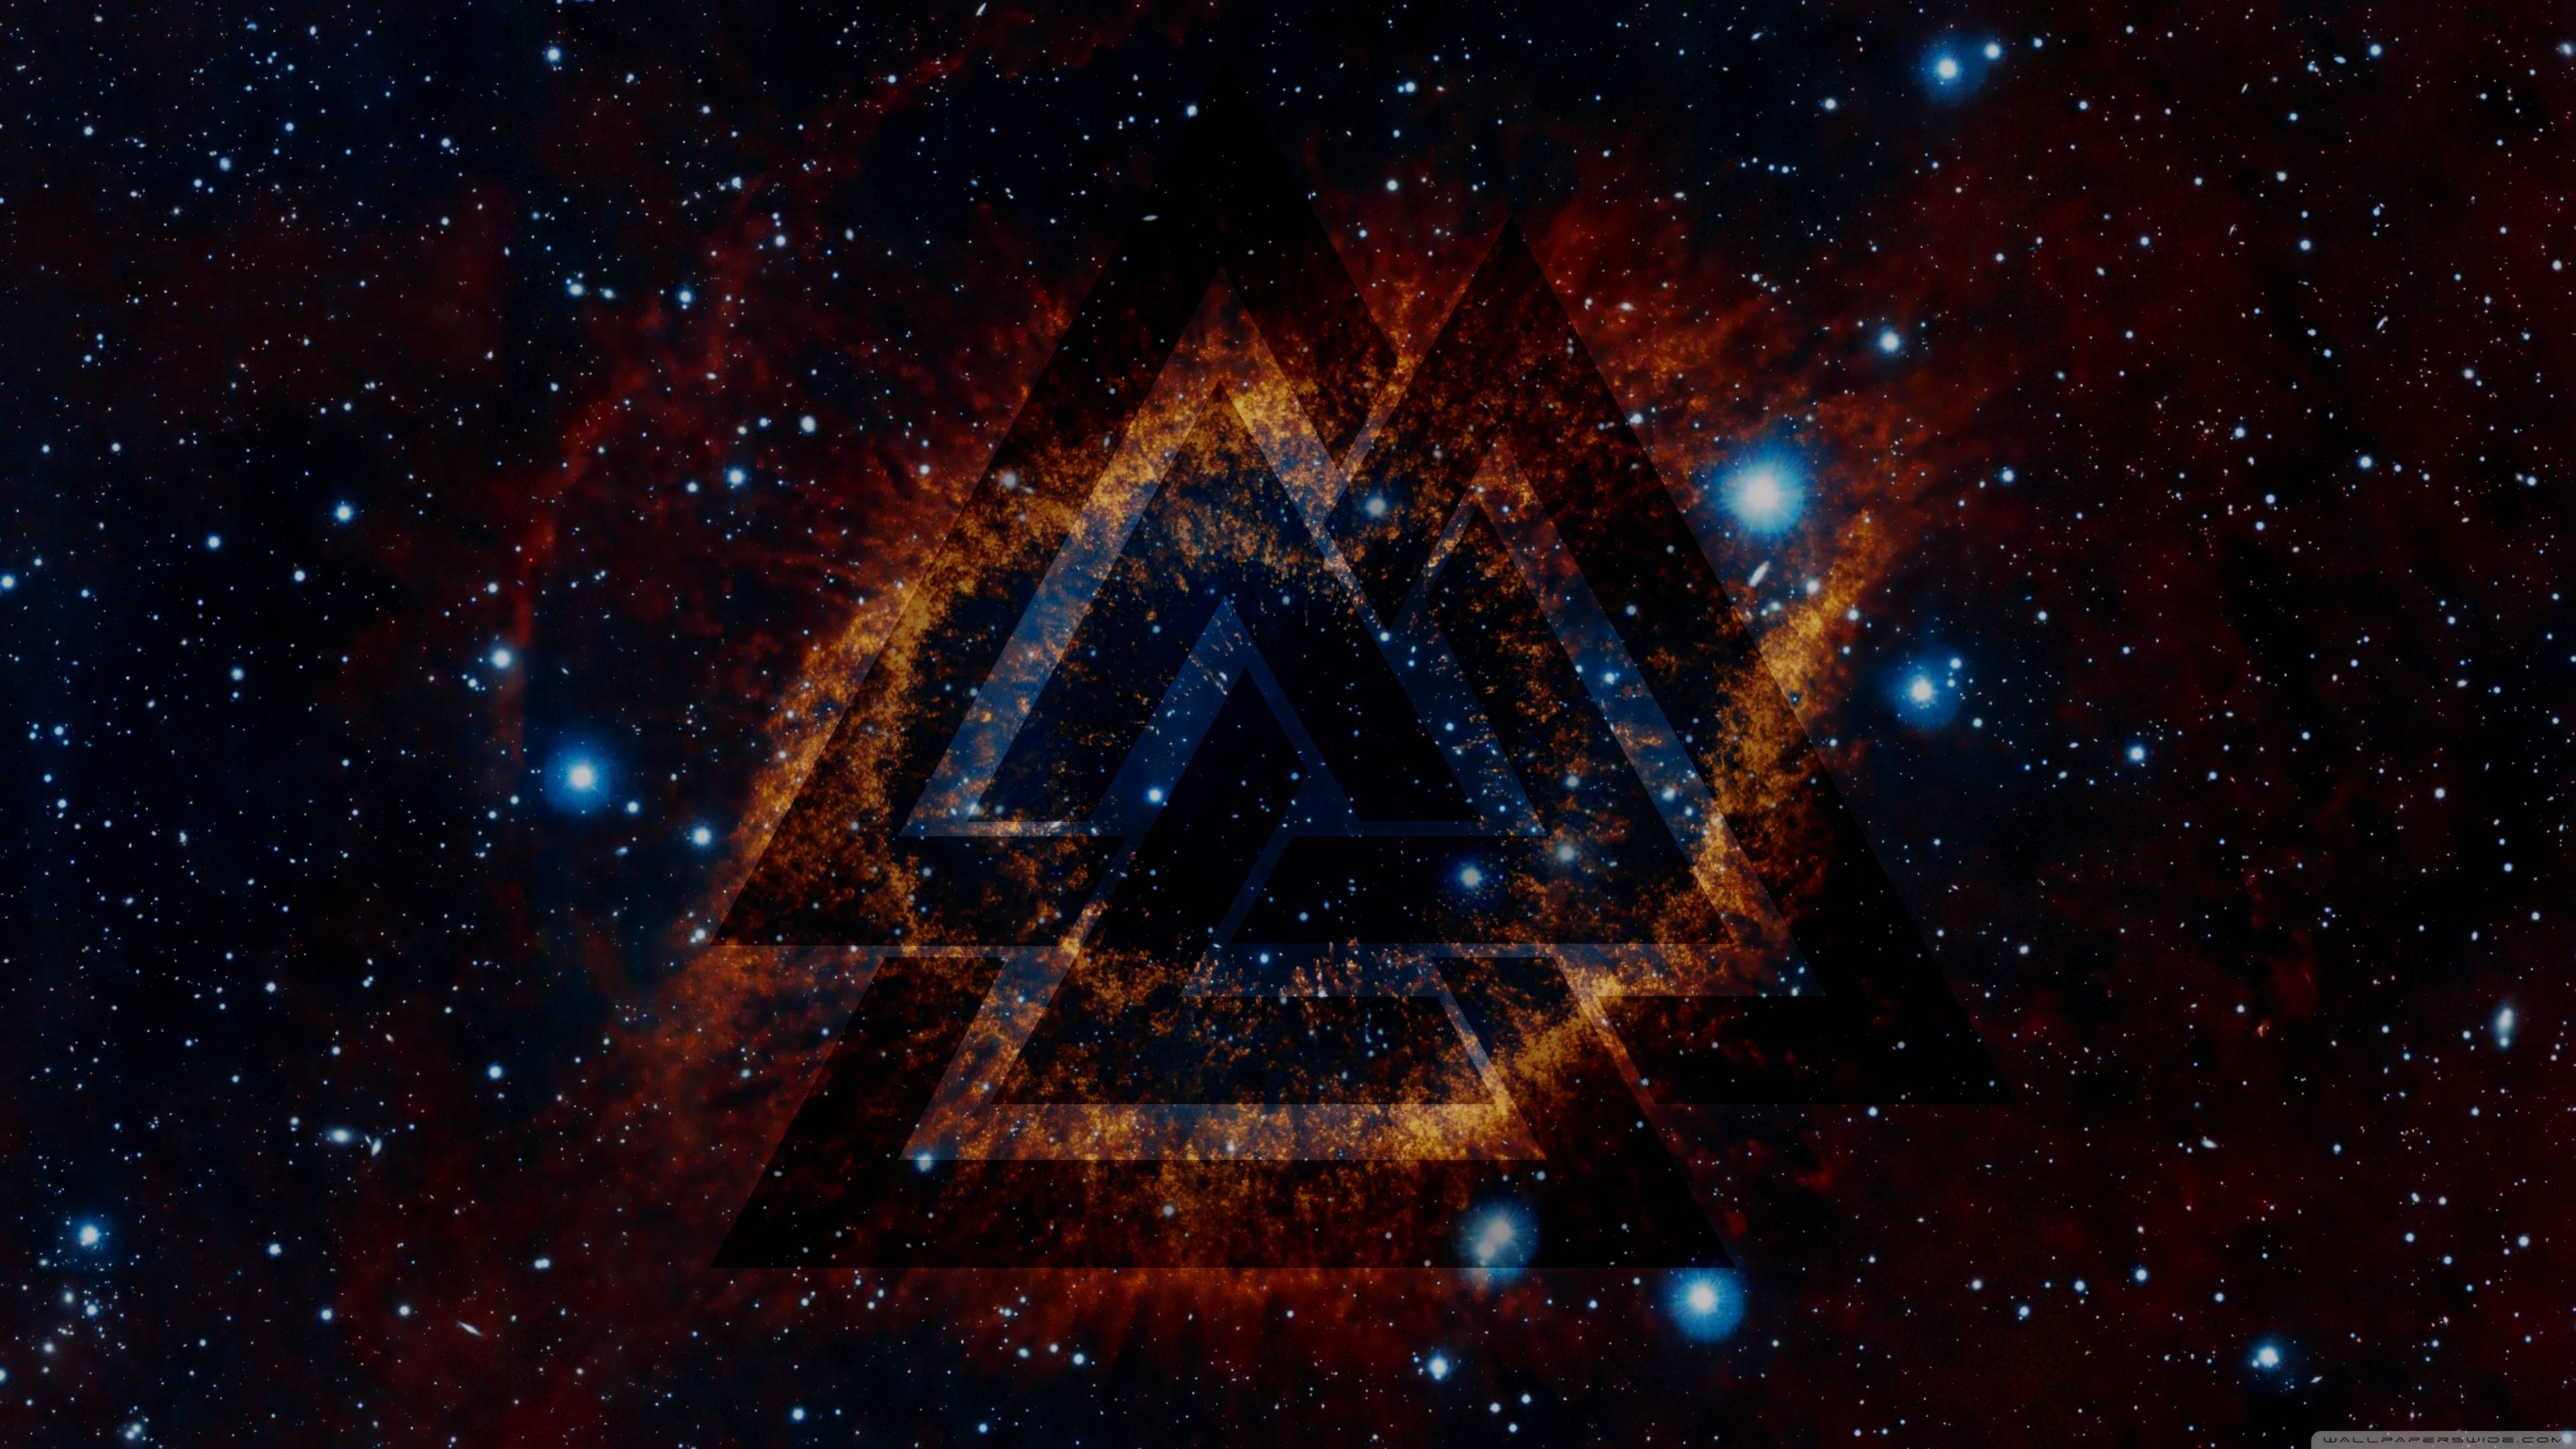 I combined a space wallpaper with a valknut overlay